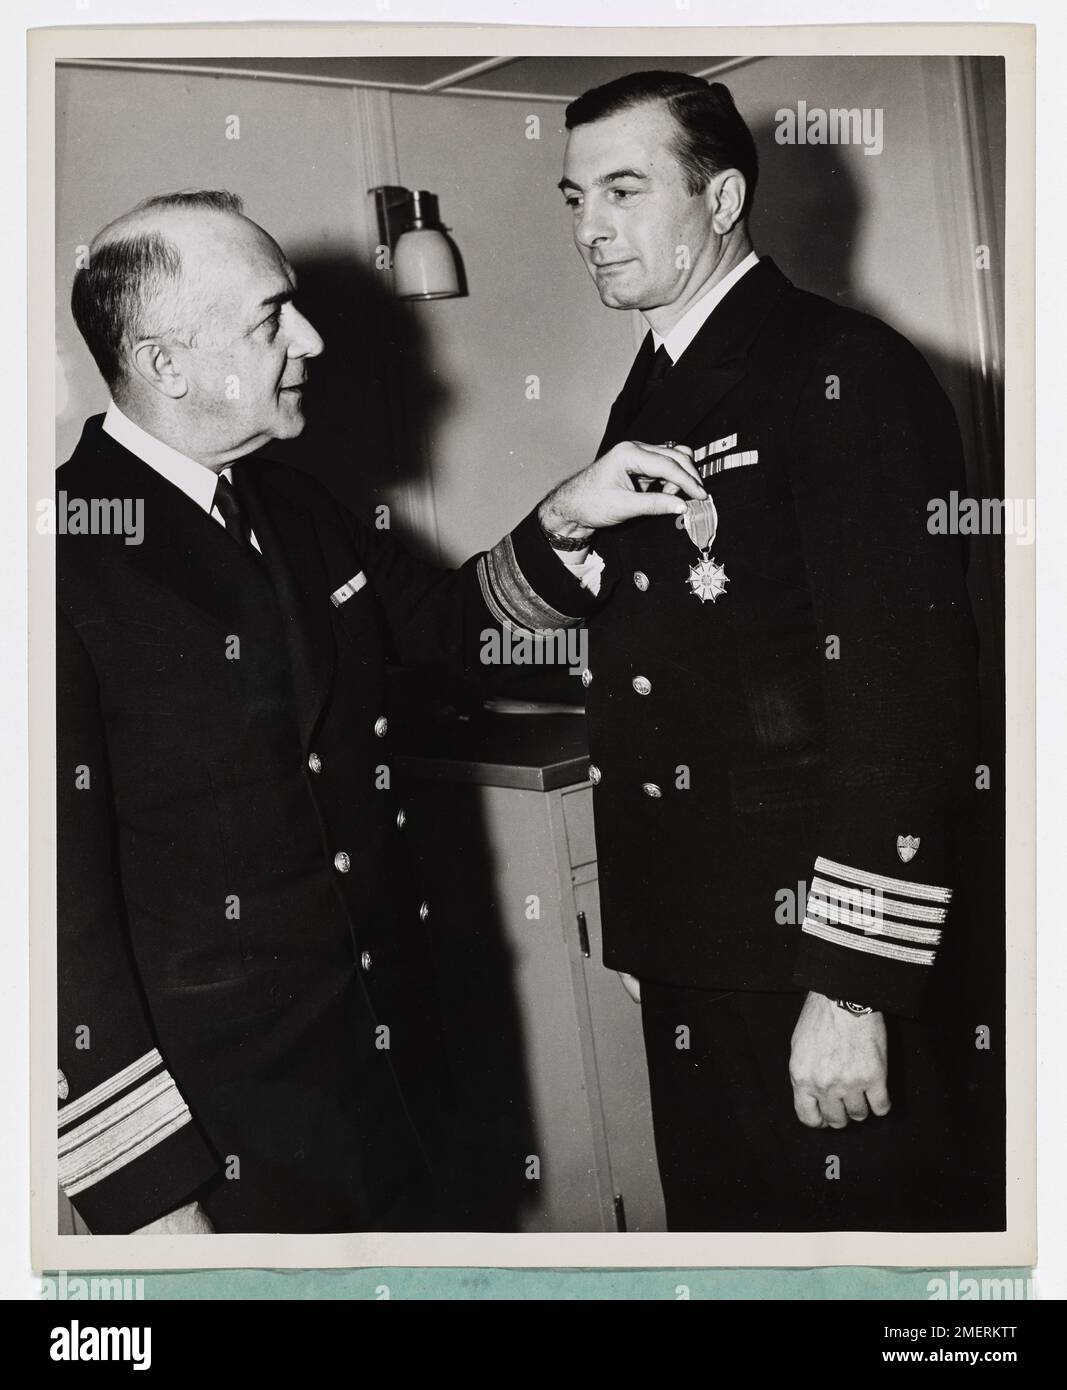 RADM Leon C. Covell presents Coast Guard Captain Edward H. Fritzsche with the Legion of Merit Medal. Coast Guard Captain Edward H. Fritzsche (right), skipper of a Coast Guard-manned invasion transport, is presented the Legion of Merit Medal for 'exceptionally meritorious conduct' as Assault Group Commander of American and British transports and landing craft in the Normandy invasion on D-Day. Rear Admiral (ret) Leon C. Covell is shown making the presentation. Captain Fritzsche directed the unloading of the now famous 'Fighting First Division' which won a Presidential Unit citation. Captain Fri Stock Photo